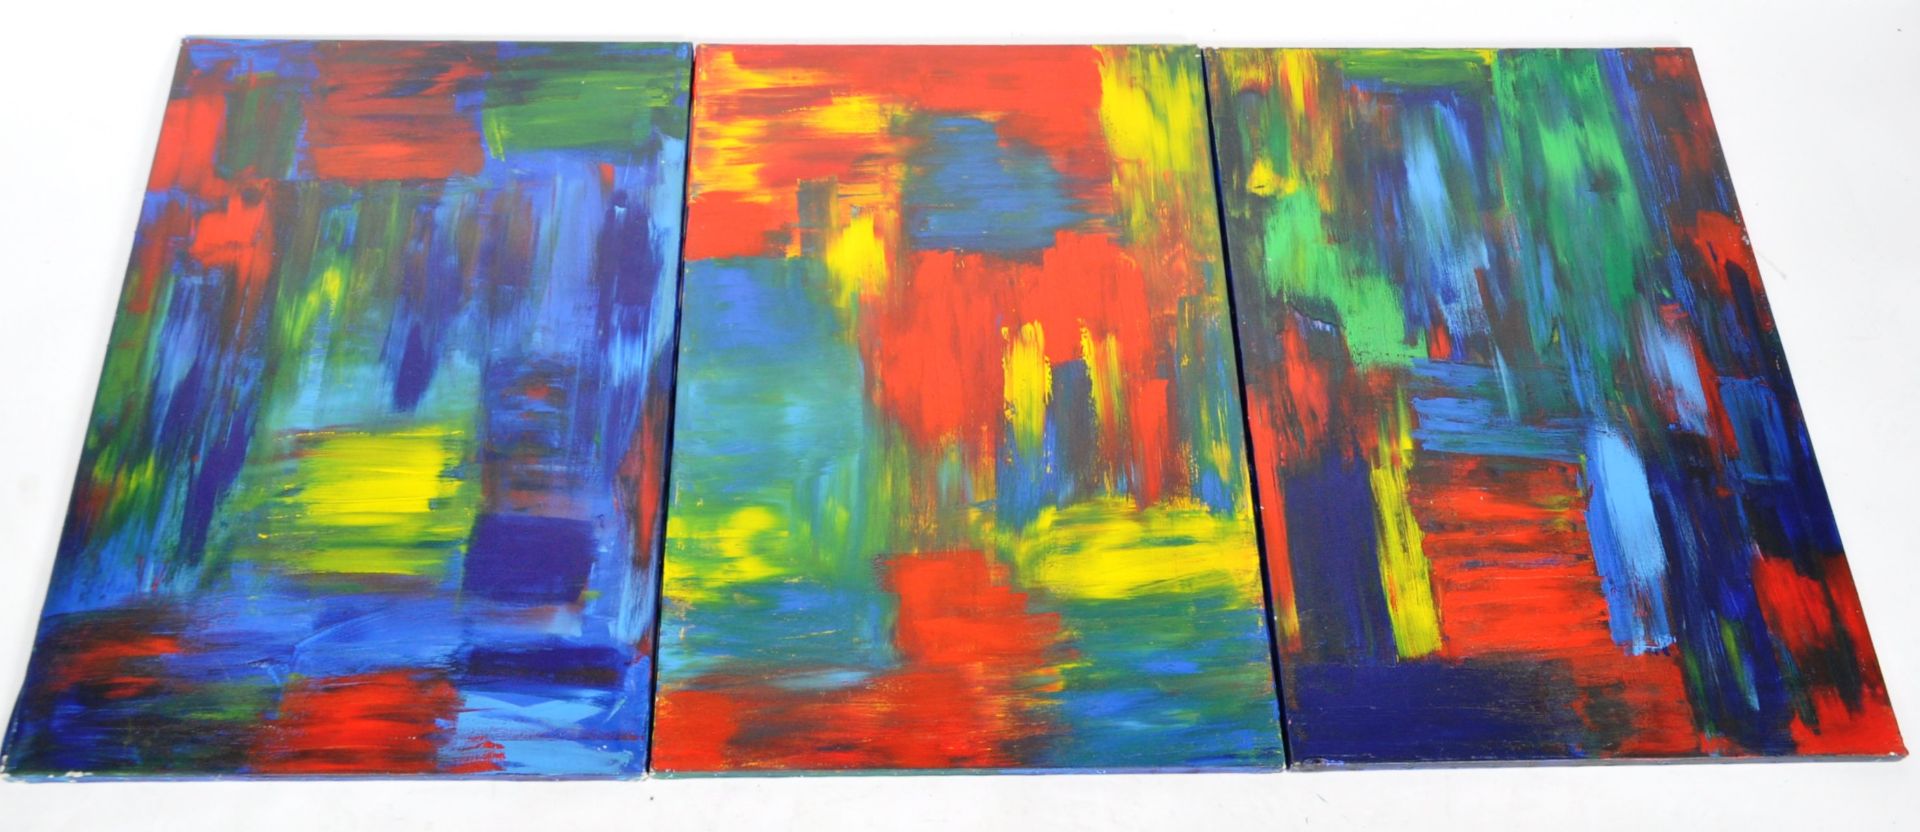 FRANCES BILDNER - NYC CENTRAL PARK - ACRYLIC ON CANVASES - Image 2 of 5